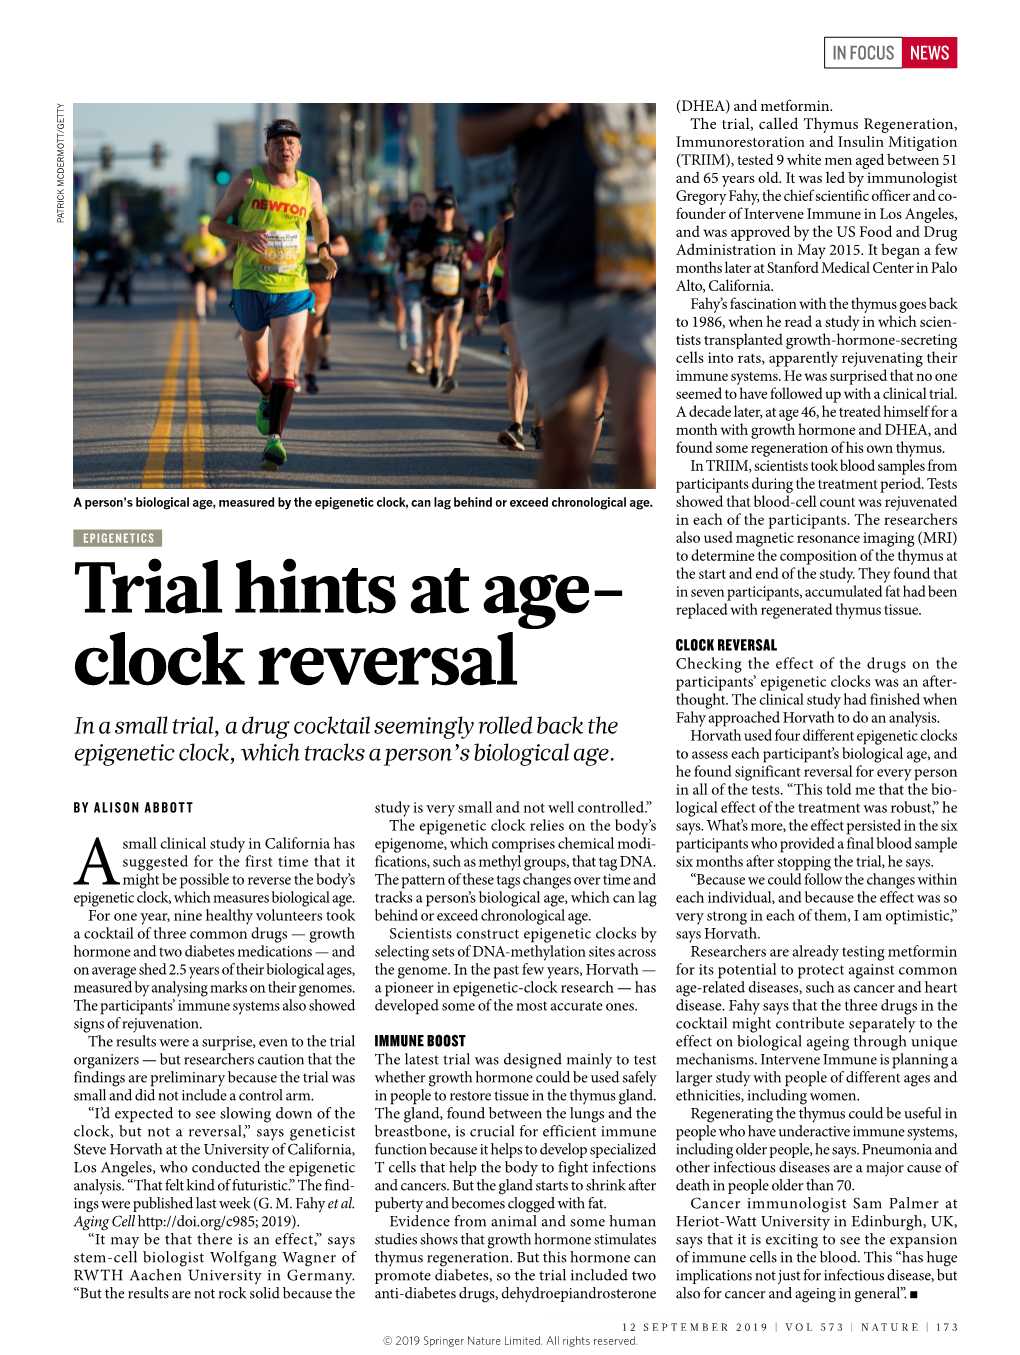 Trial Hints at Age- Clock Reversal